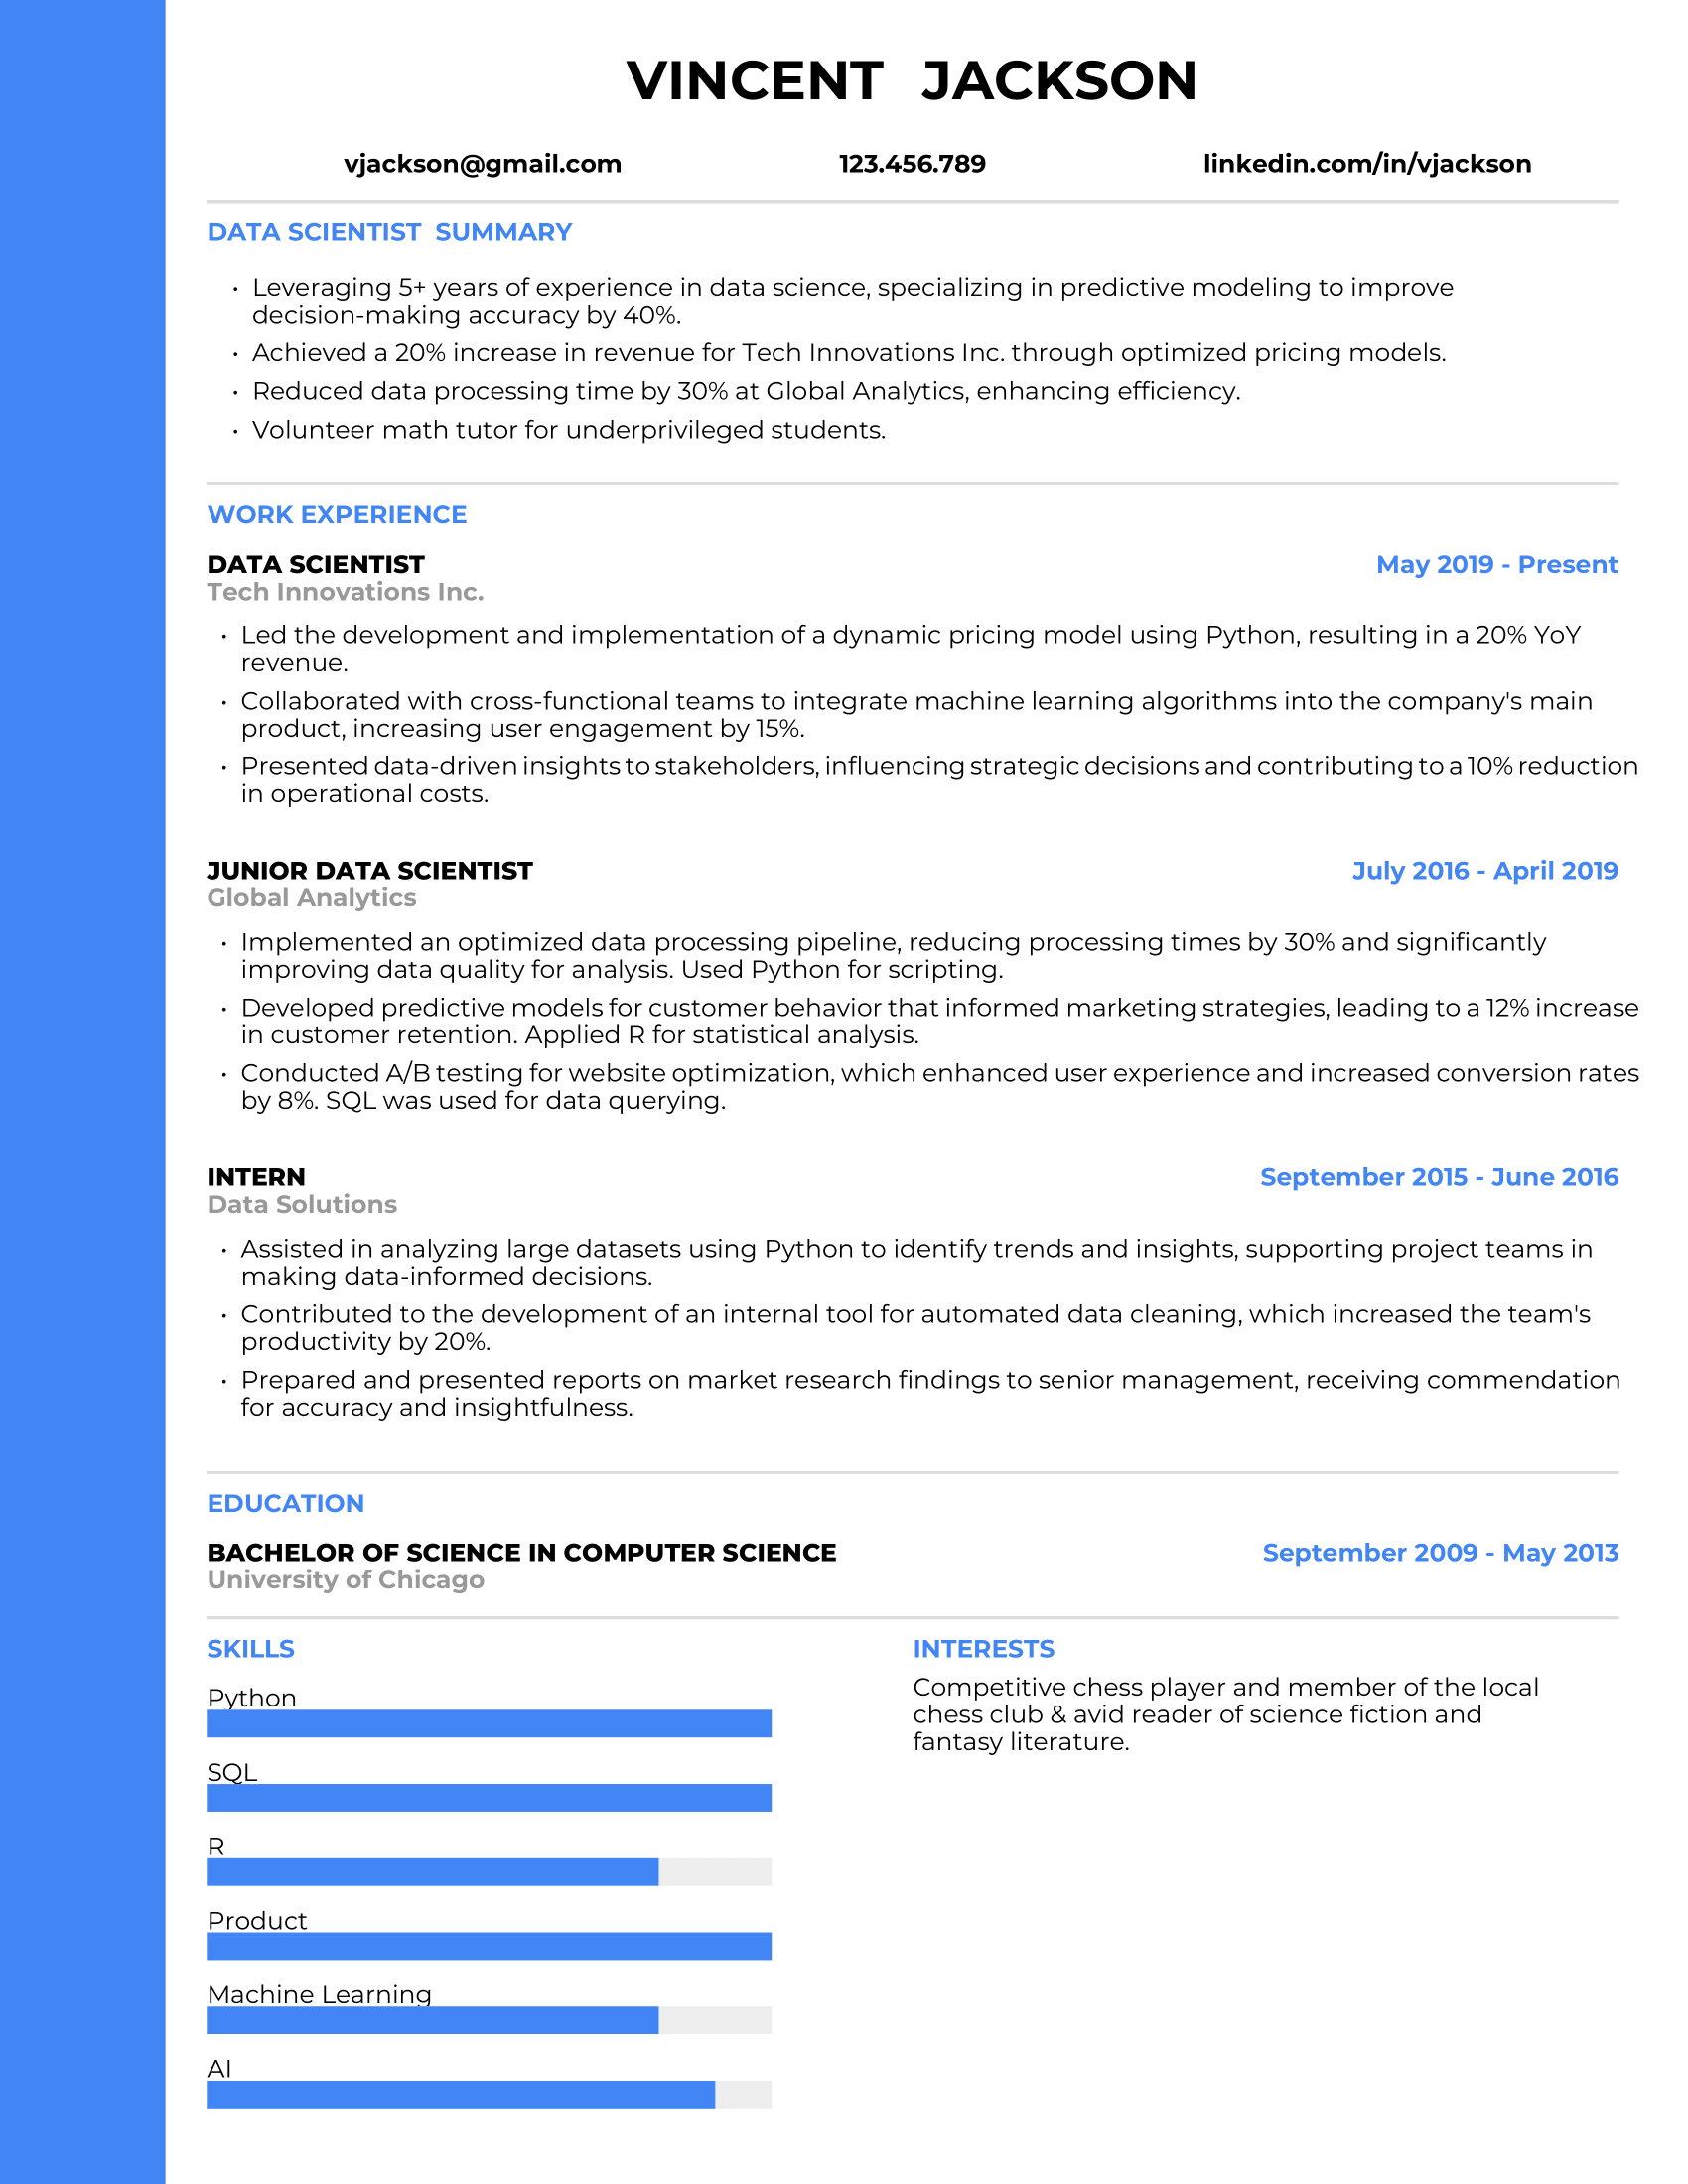 Data Scientist Resume Example #1 - Traditional